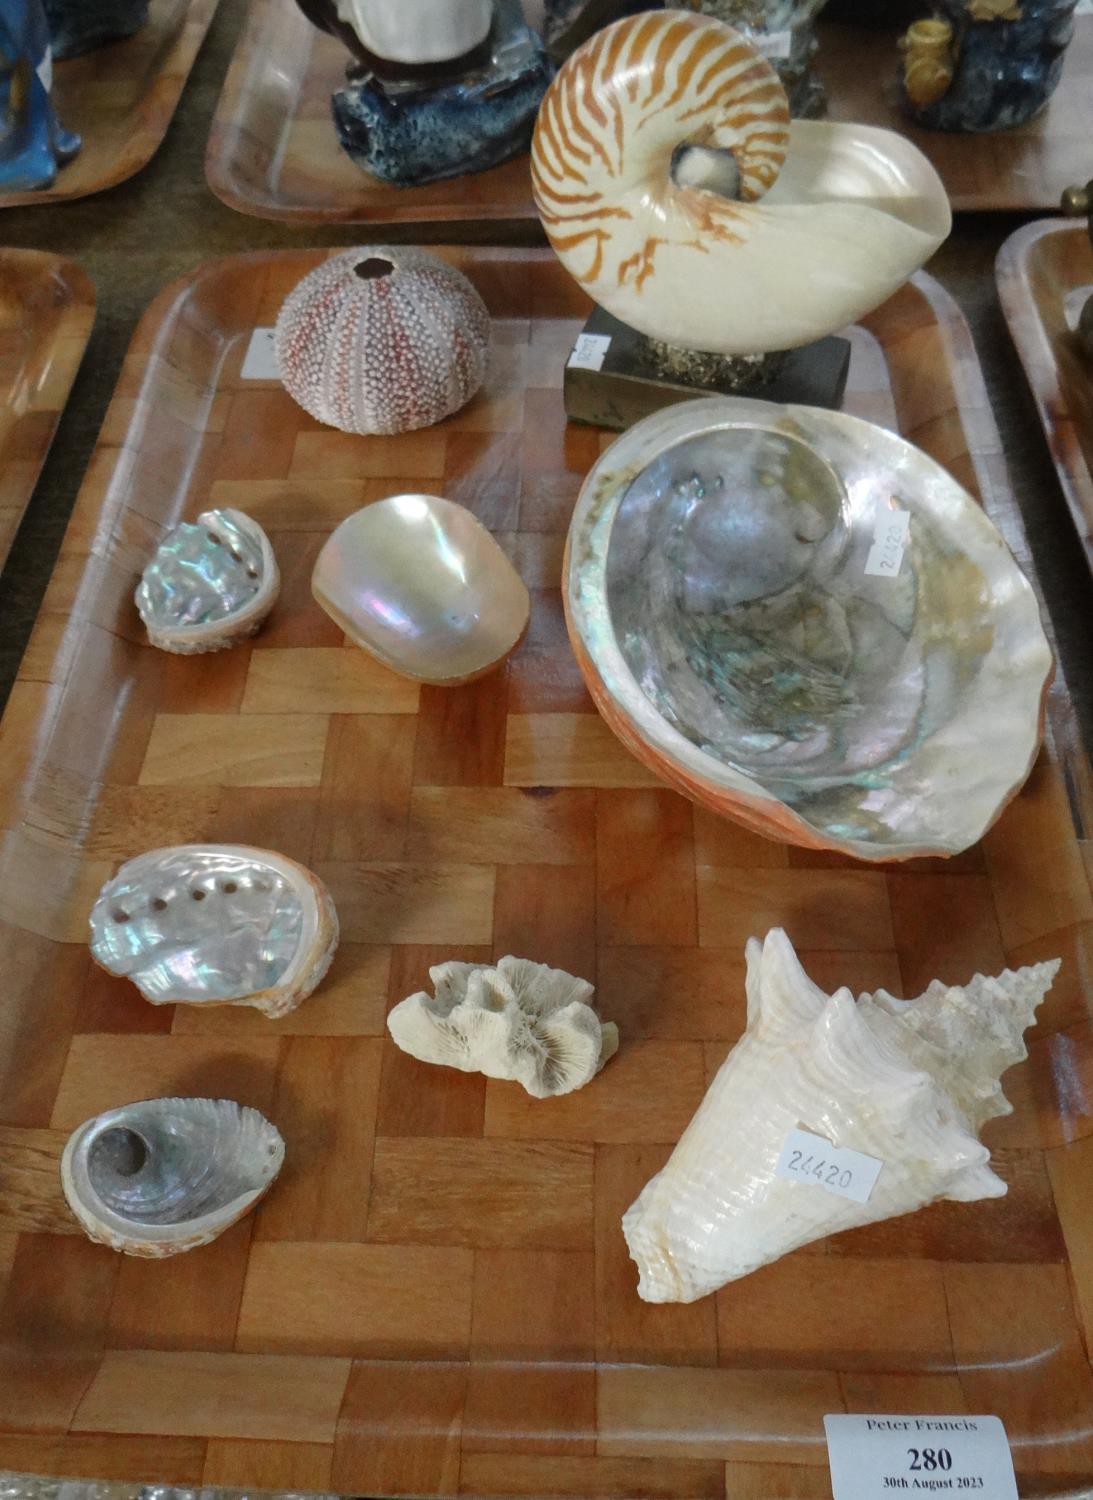 Tray of shells, to include: a mounted Nautilus shell, Abalone shells, sea urchin, conch shell